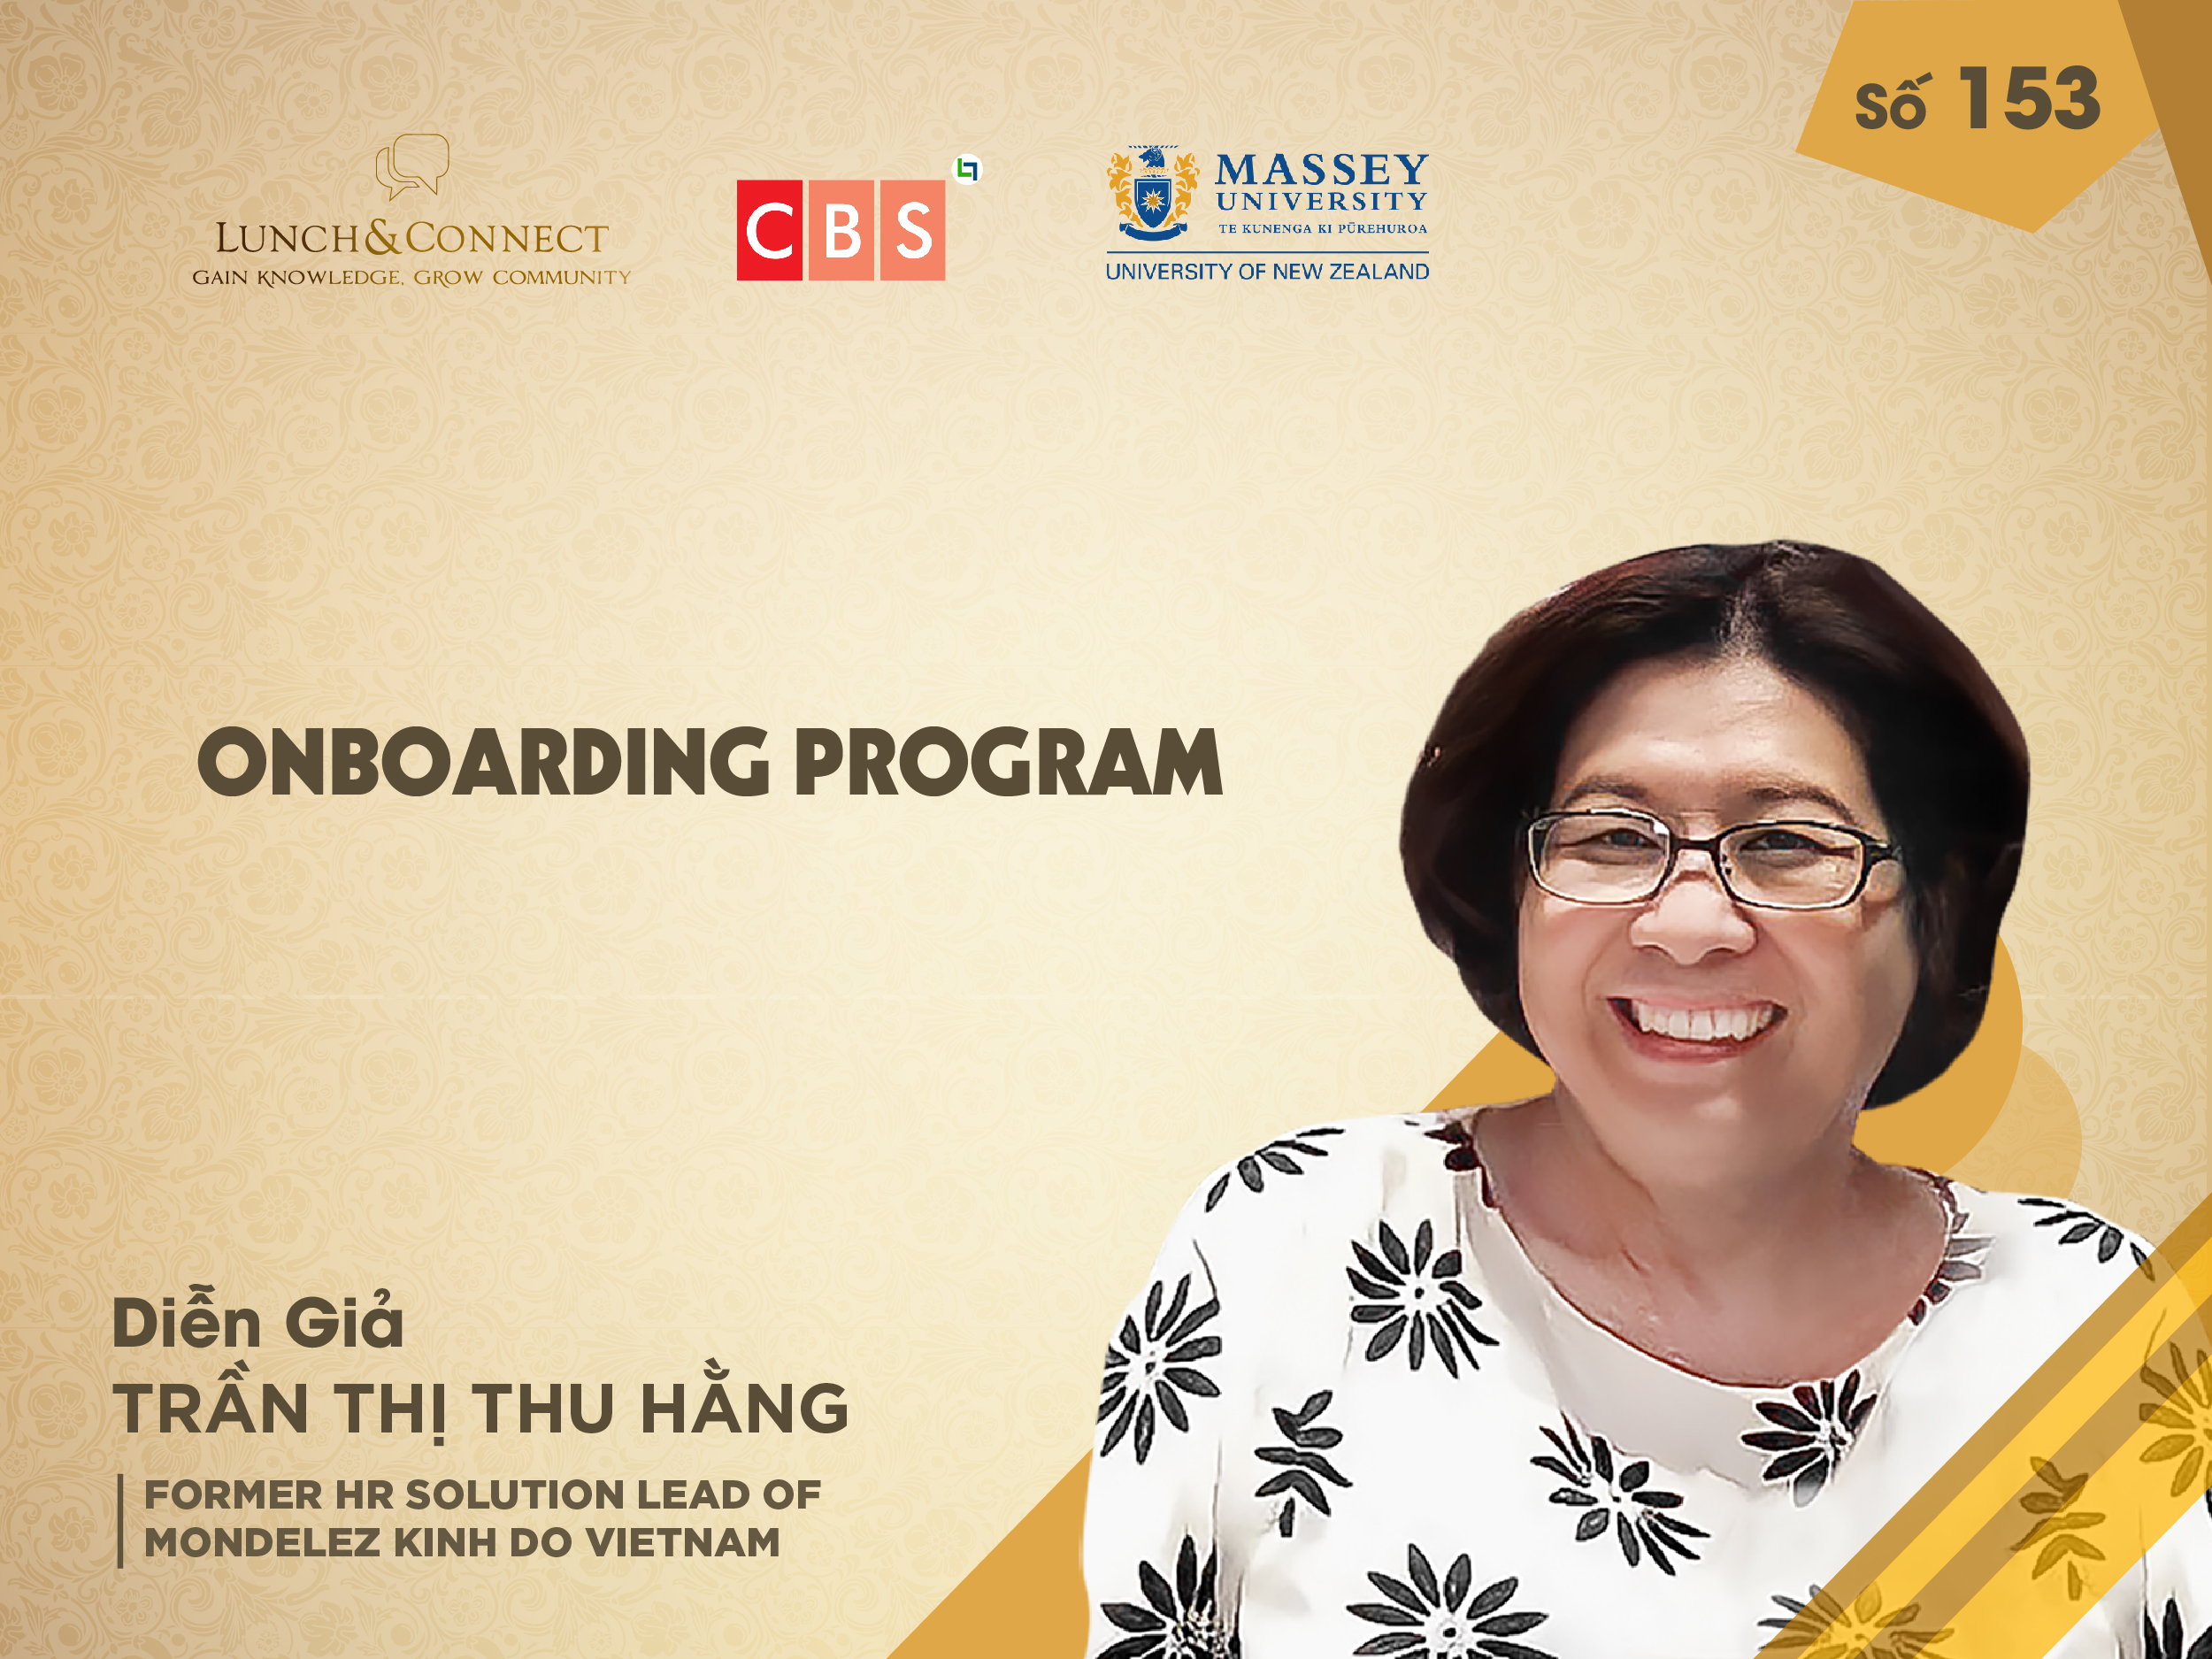 [ Lunch&Connect Số 153 ] – HR COMMUNITY – ONBOARDING PROGRAM